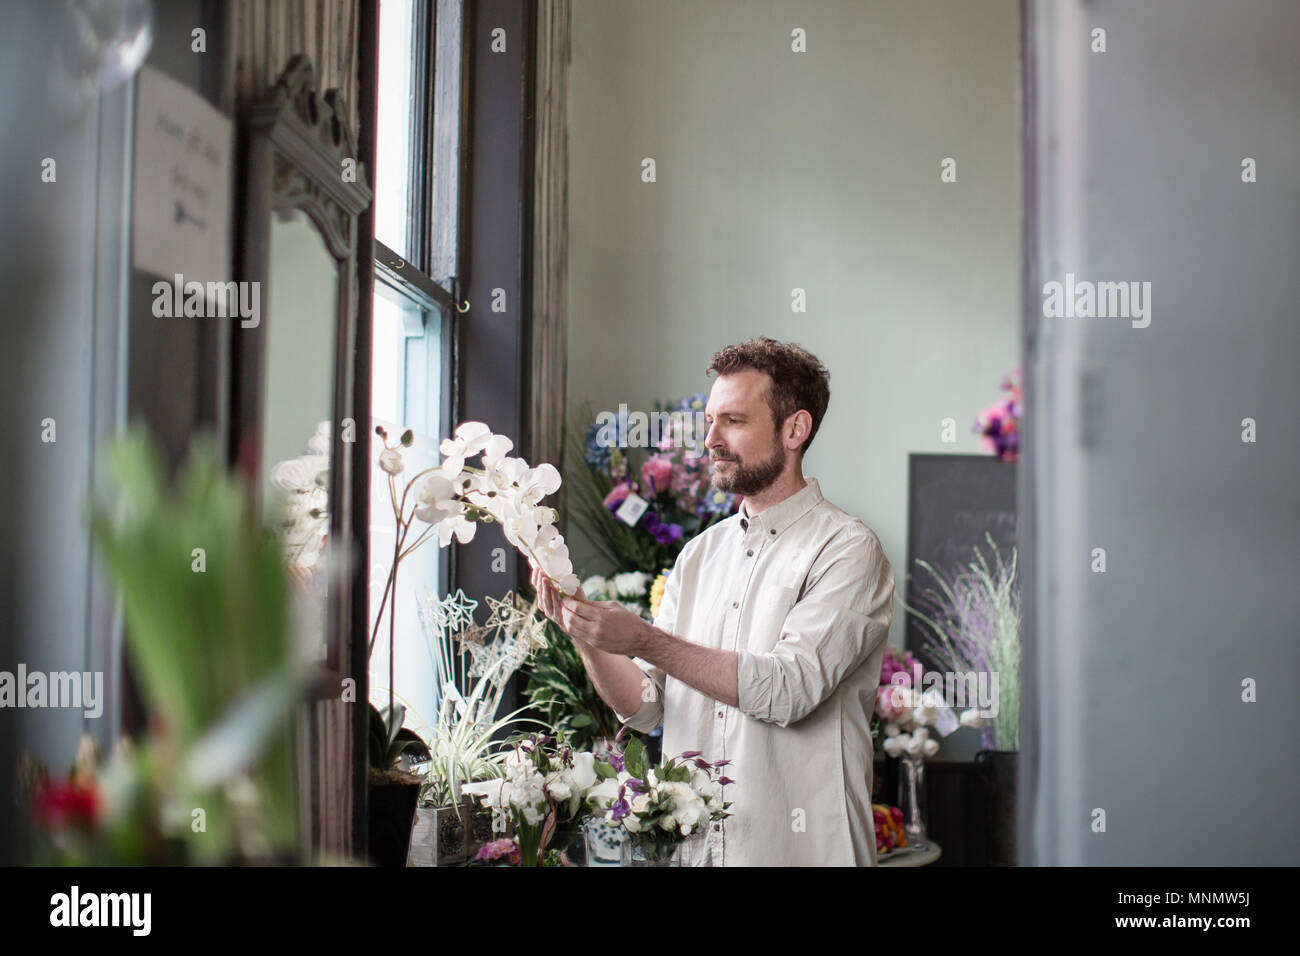 Florist working in store Stock Photo